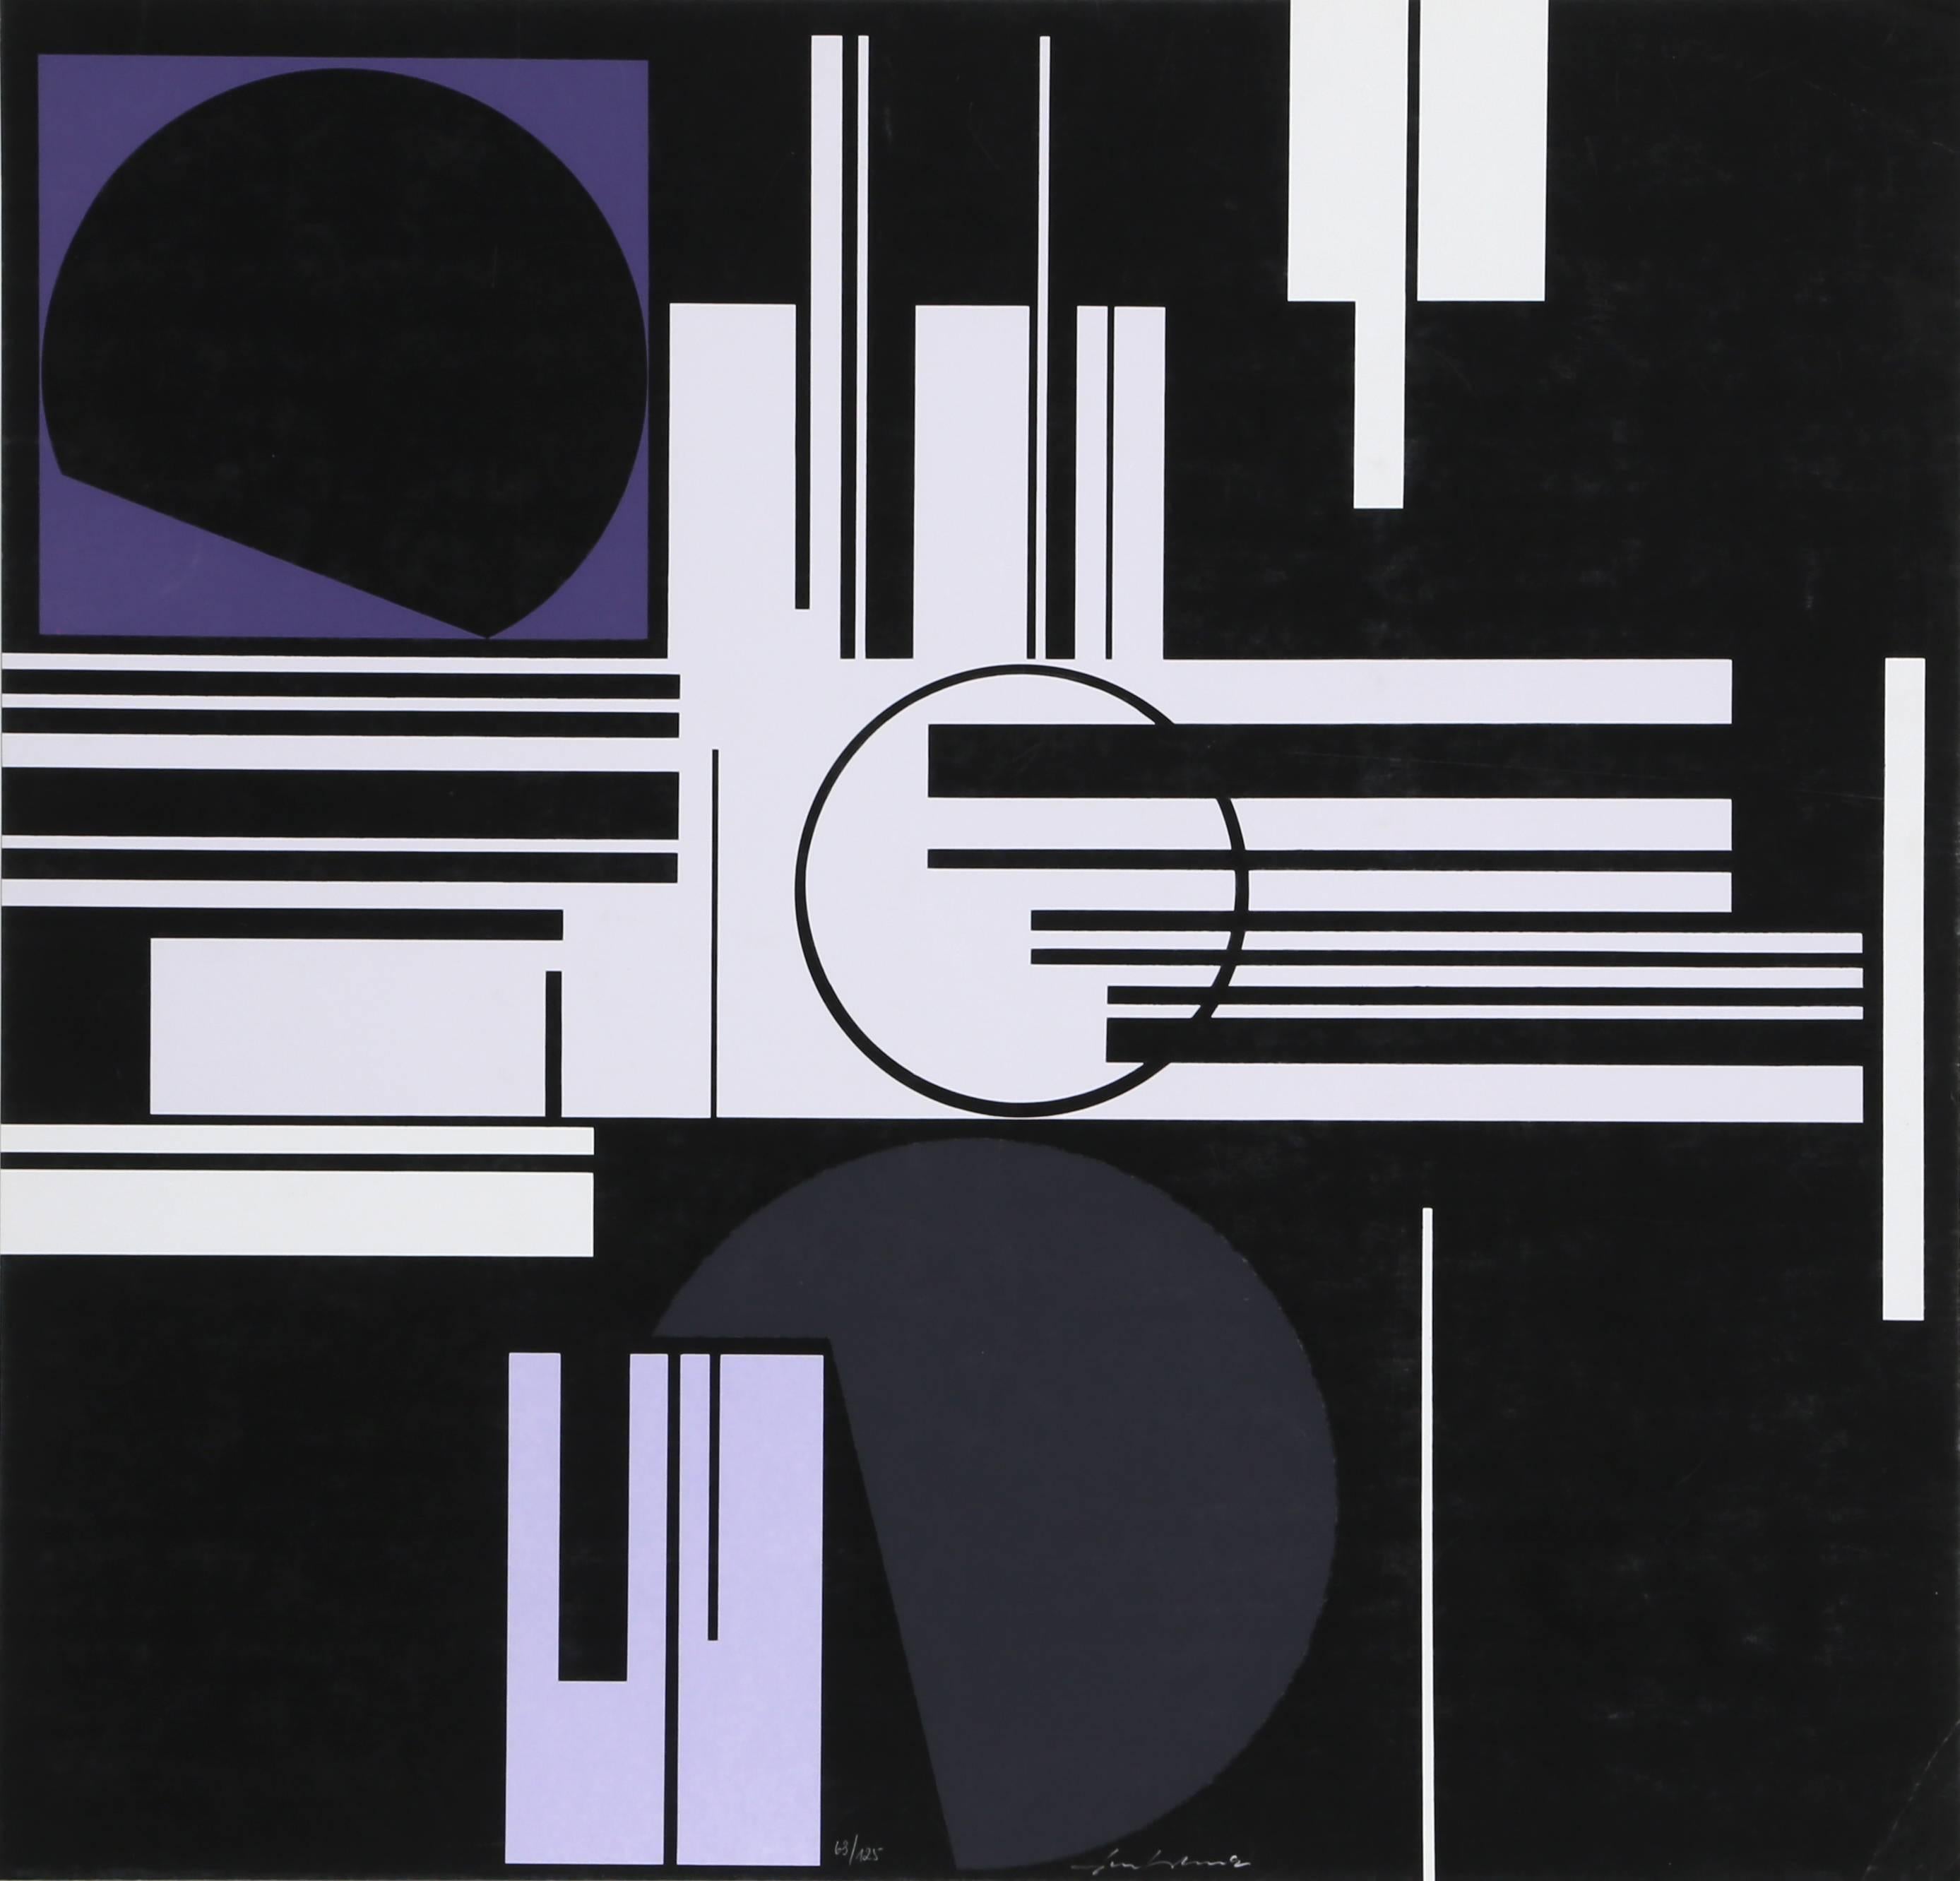 Artist: Gunter Fruhtrunk, German (1923 - 1982)
Title: Untitled 2
Year: 1971
Medium: Silkscreen, signed and numbered in pencil
Edition: 63/125
Size: 24.5 x 25.5 in. (62.23 x 64.77 cm)